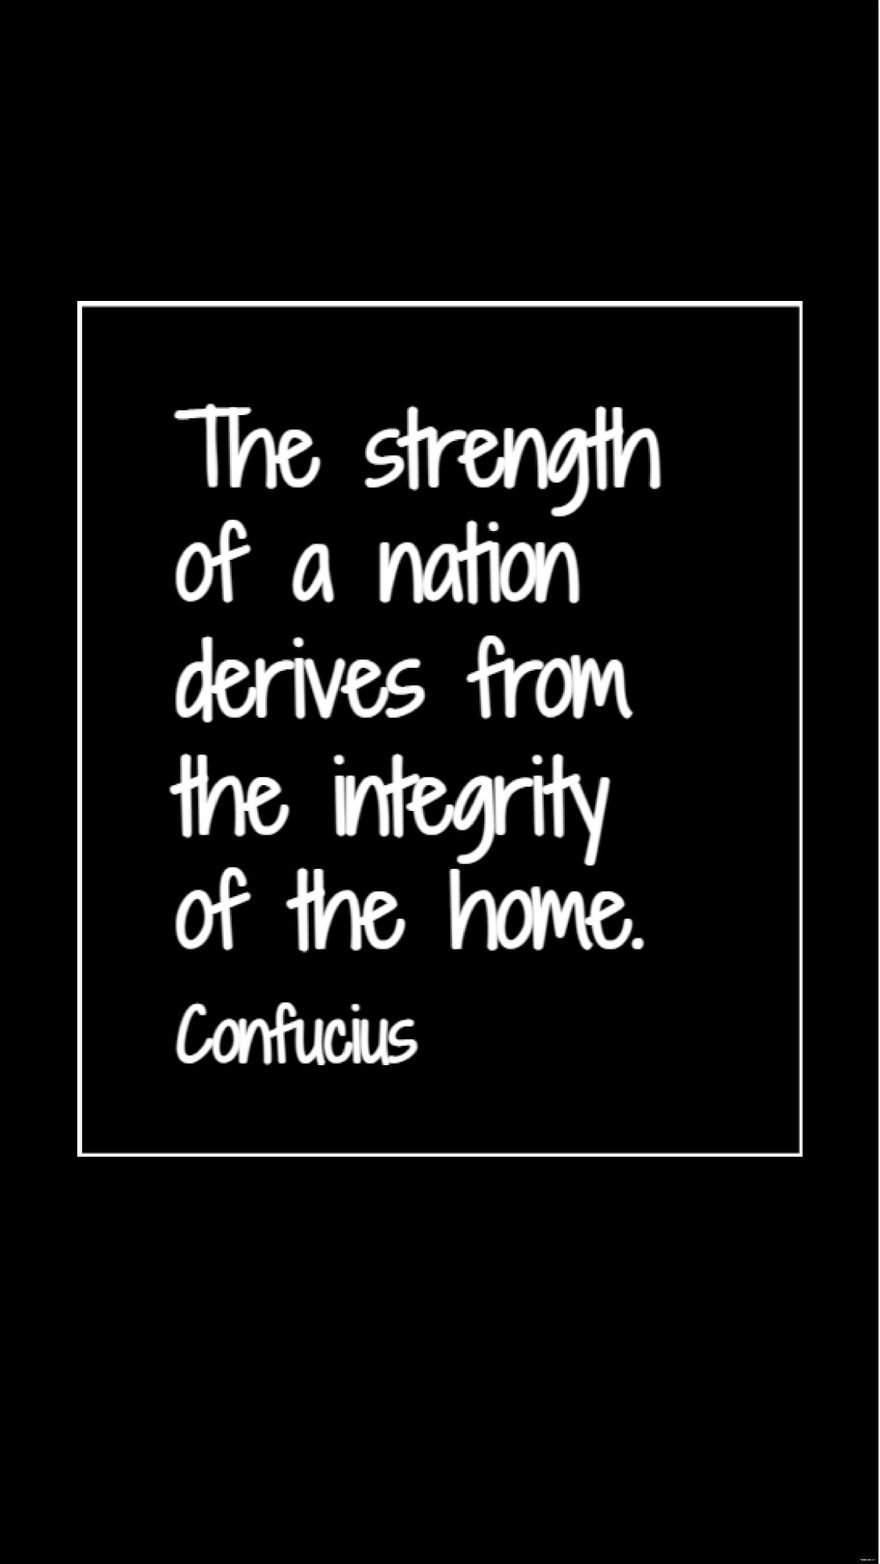 Confucius - The strength of a nation derives from the integrity of the home. in JPG